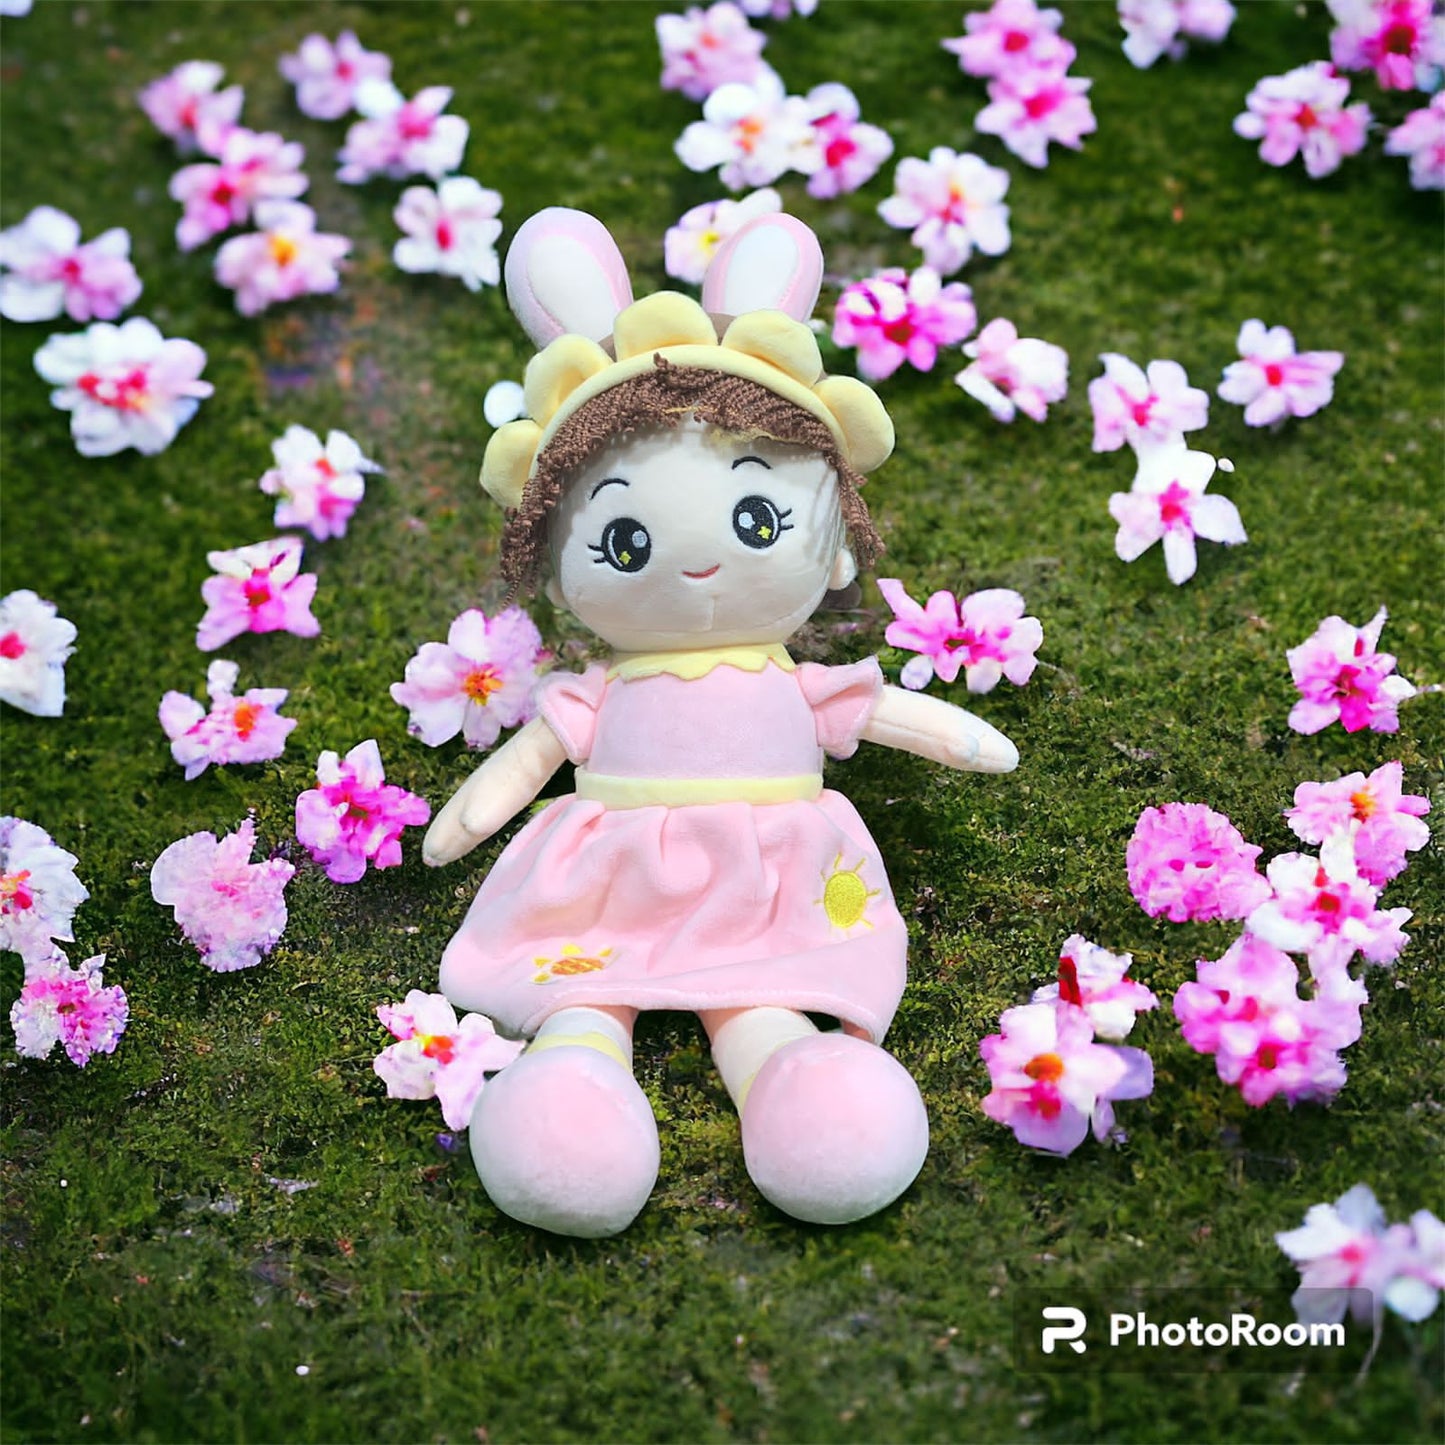 " Flower Doll Plush Toy - Whimsical Blooms and Endless Hugs!"